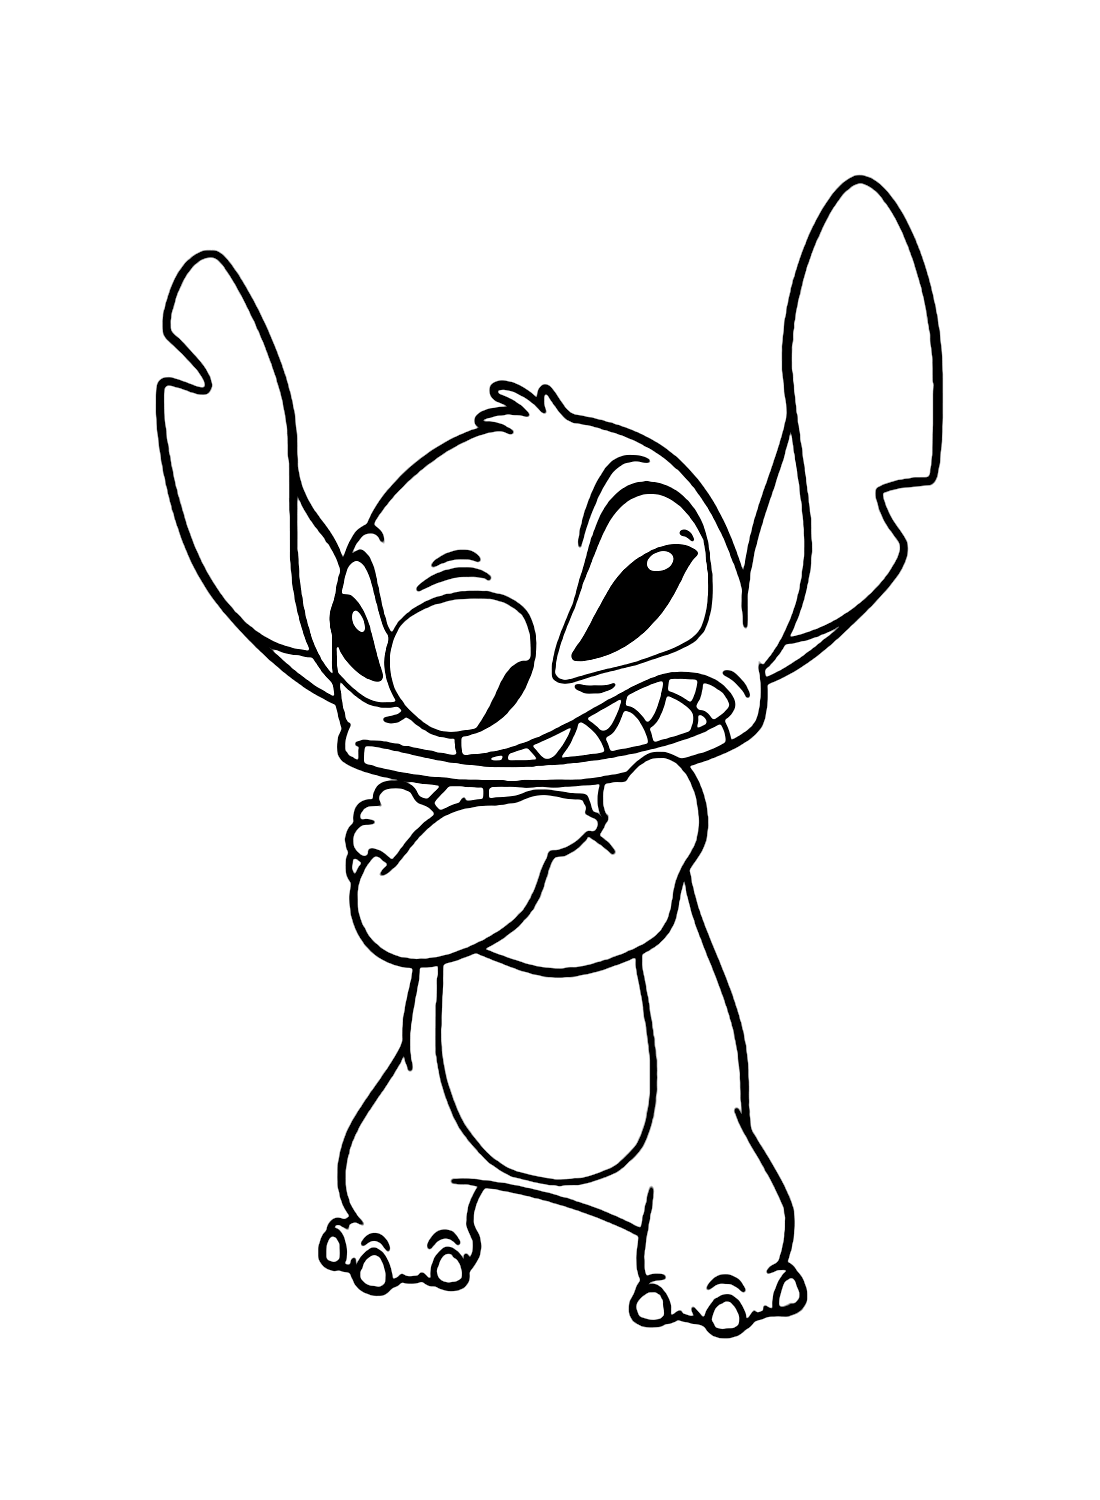 Stitch Coloring Pages Printable Coloring Page